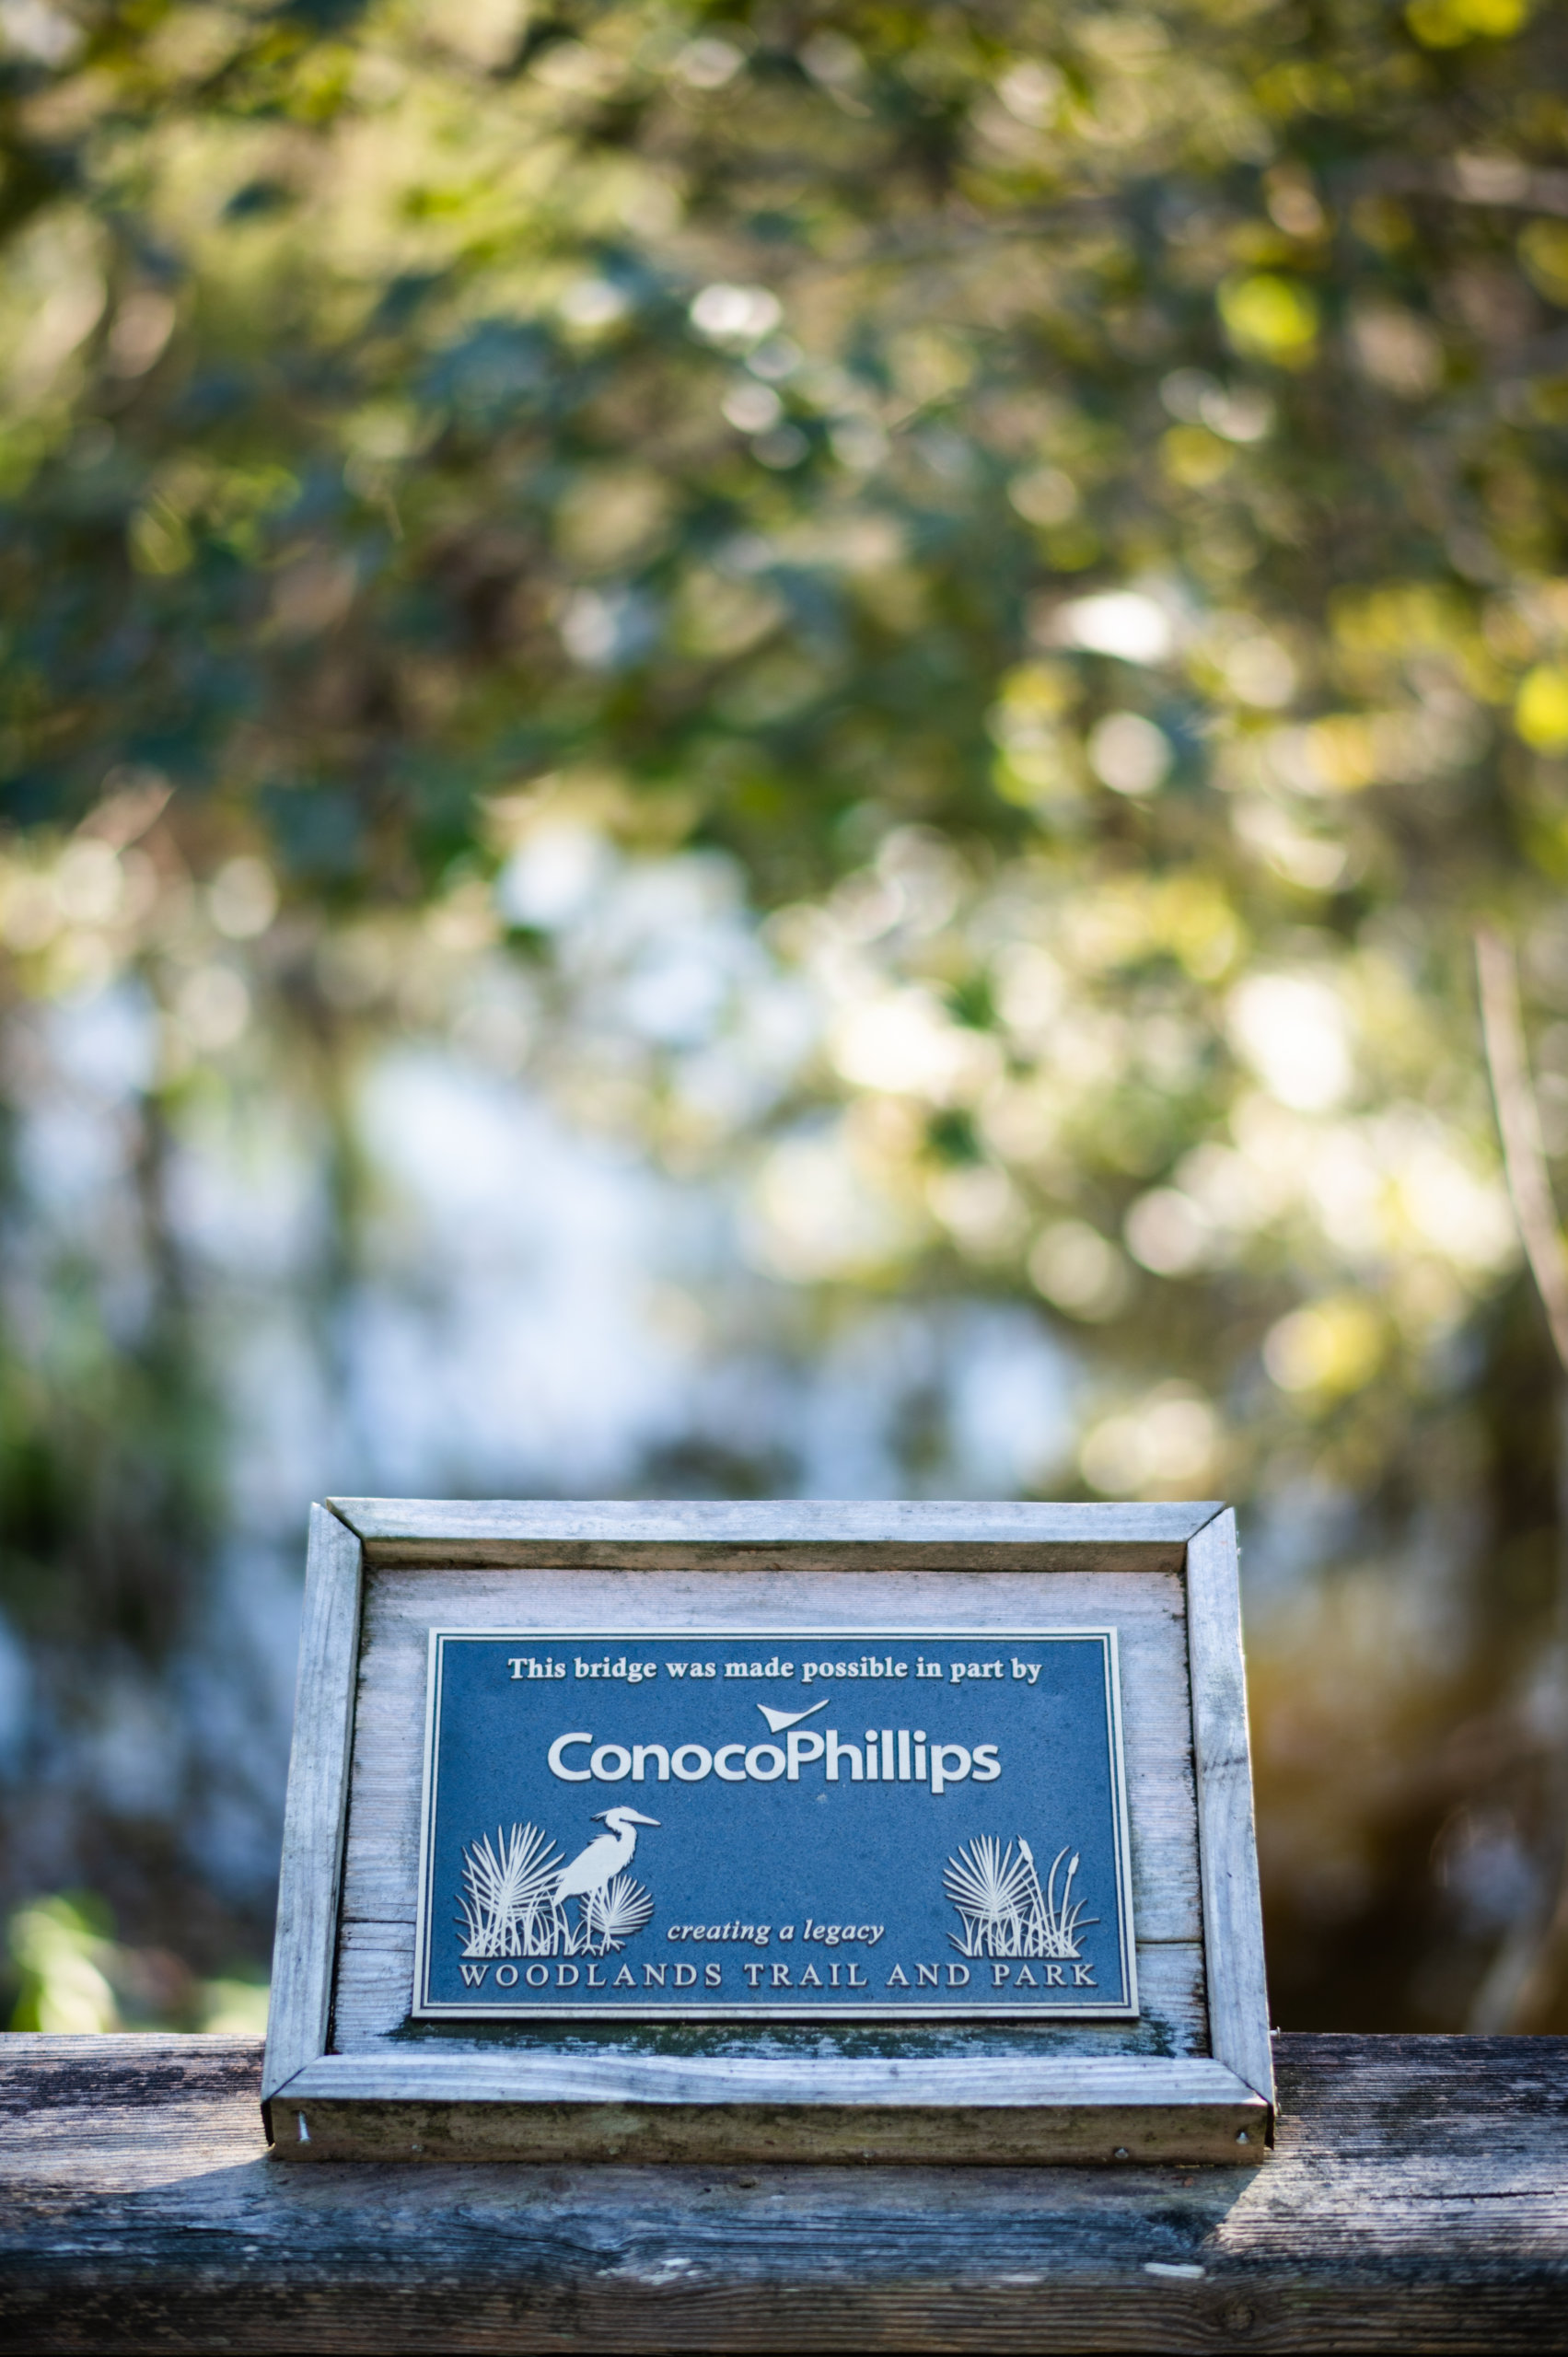 A sign in Woodlands notes funding by ConocoPhillips